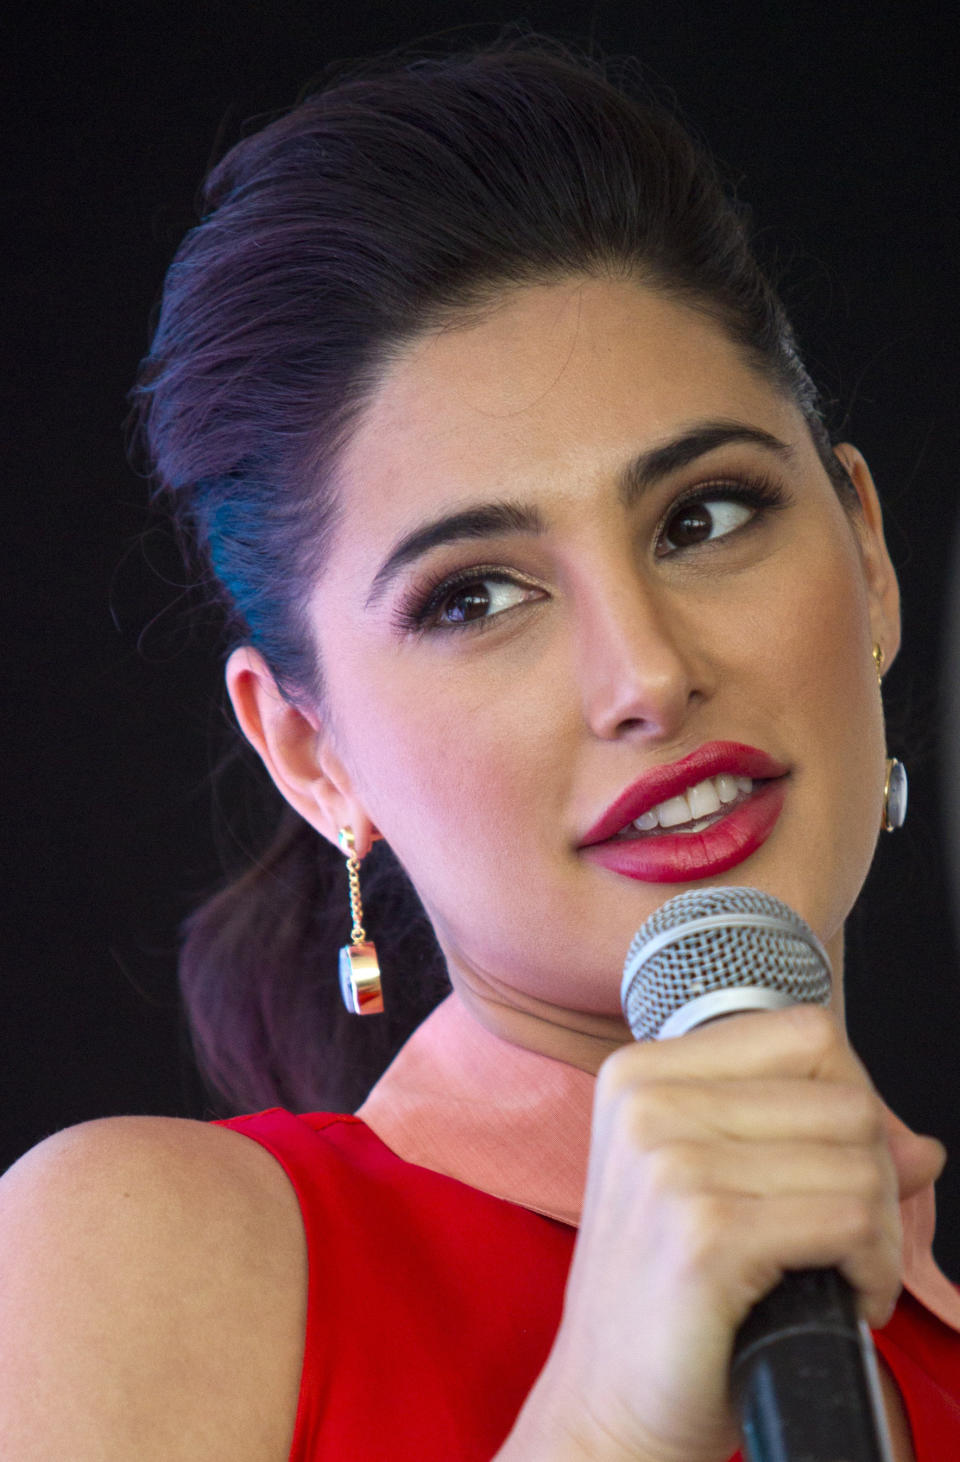 Bollywood actor Nargis Fakhri speaks during the unveiling of Samsung ChatOn application for instant messaging and file sharing, in New Delhi, India, Wednesday, April 16, 2014. The messaging application provides instant translation between English and Hindi, according to a press release. (AP Photo/Tsering Topgyal)